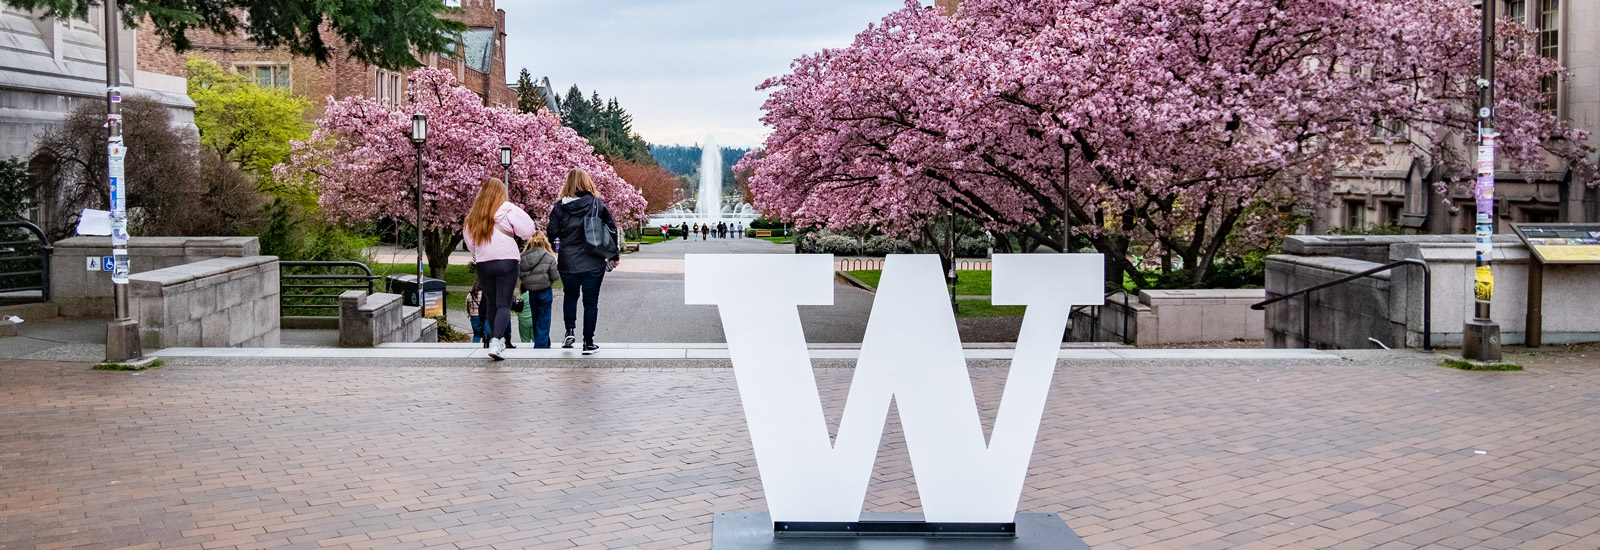 W block logo with cherry blossoms in the background